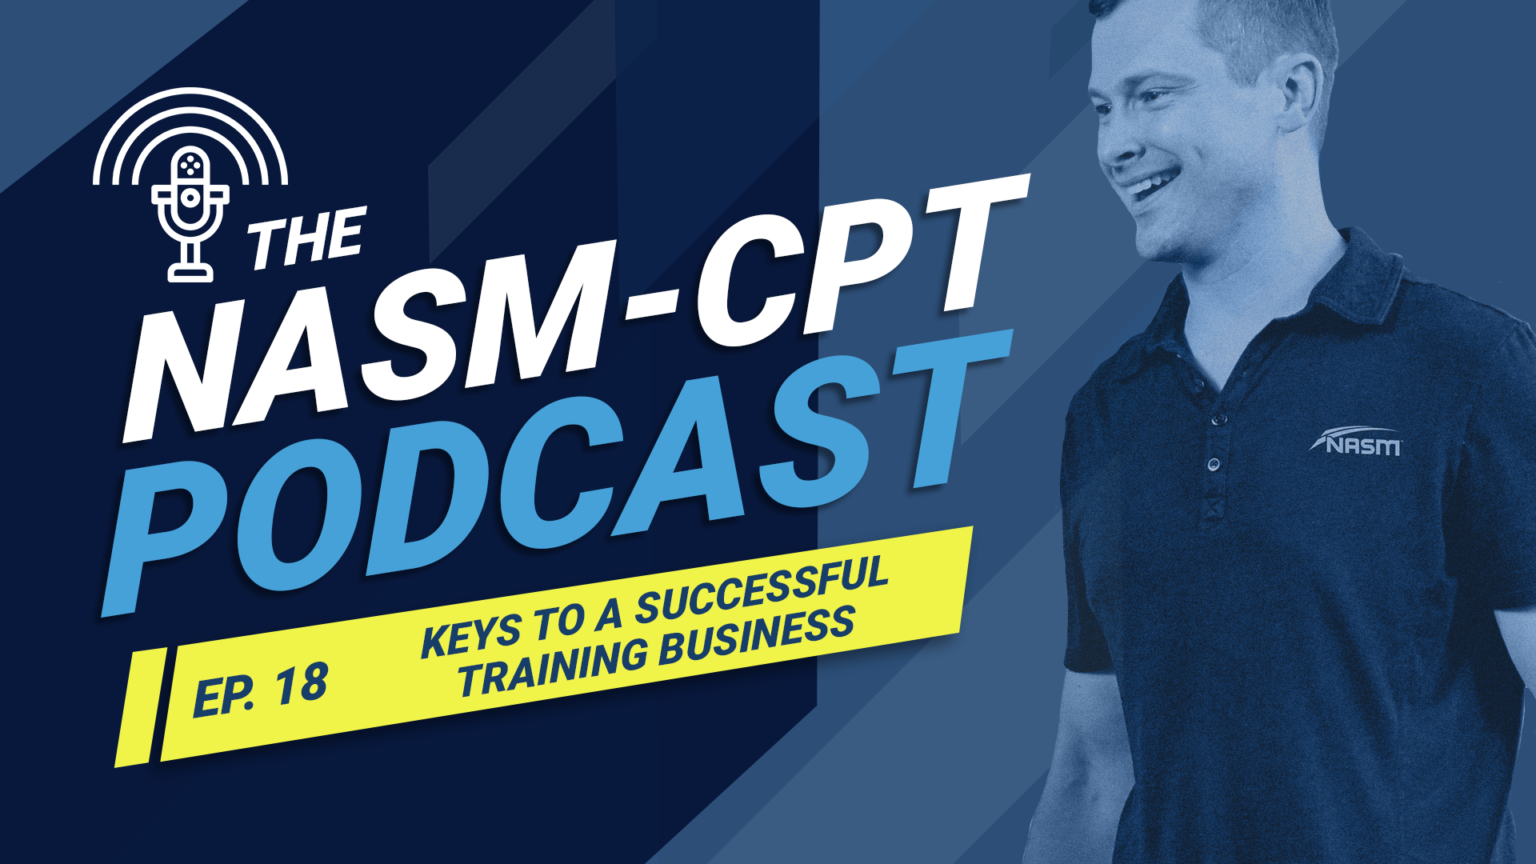 THE NASM-CPT PODCAST: KEYS TO A SUCCESSFUL PERSONAL TRAINING BUSINESS: